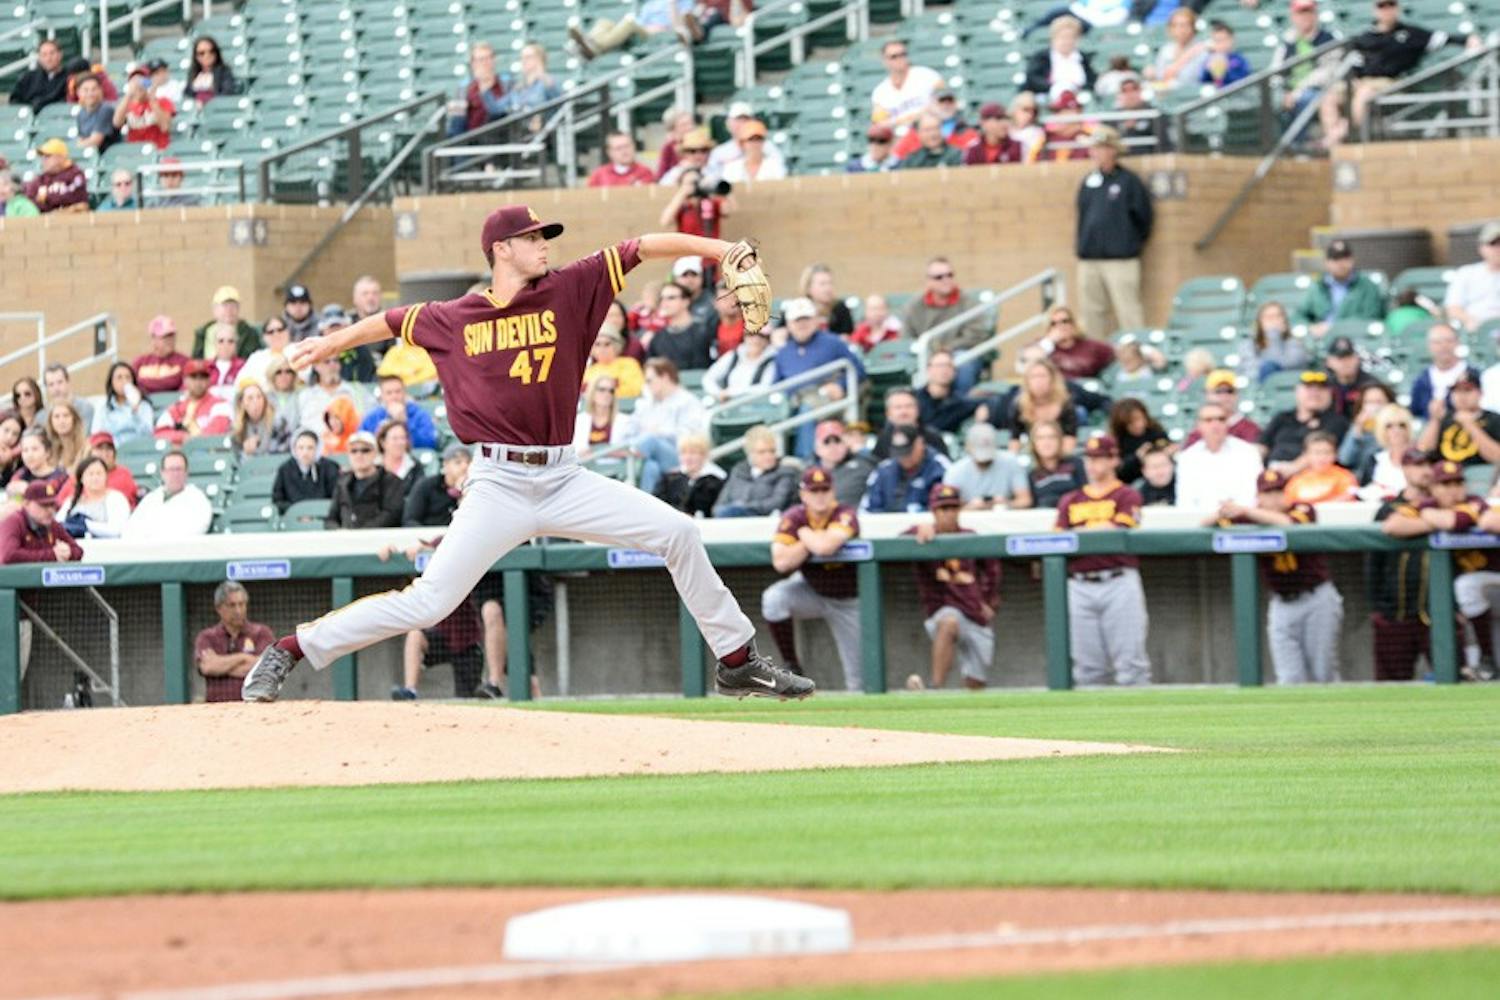 Pitcher Ryan Hingst  opens the game against the Arizona  Diamondbacks in the exhibition match-up at Salt River Fields at Talking  Stick Resort on March 3, 2015, in Scottsdale.